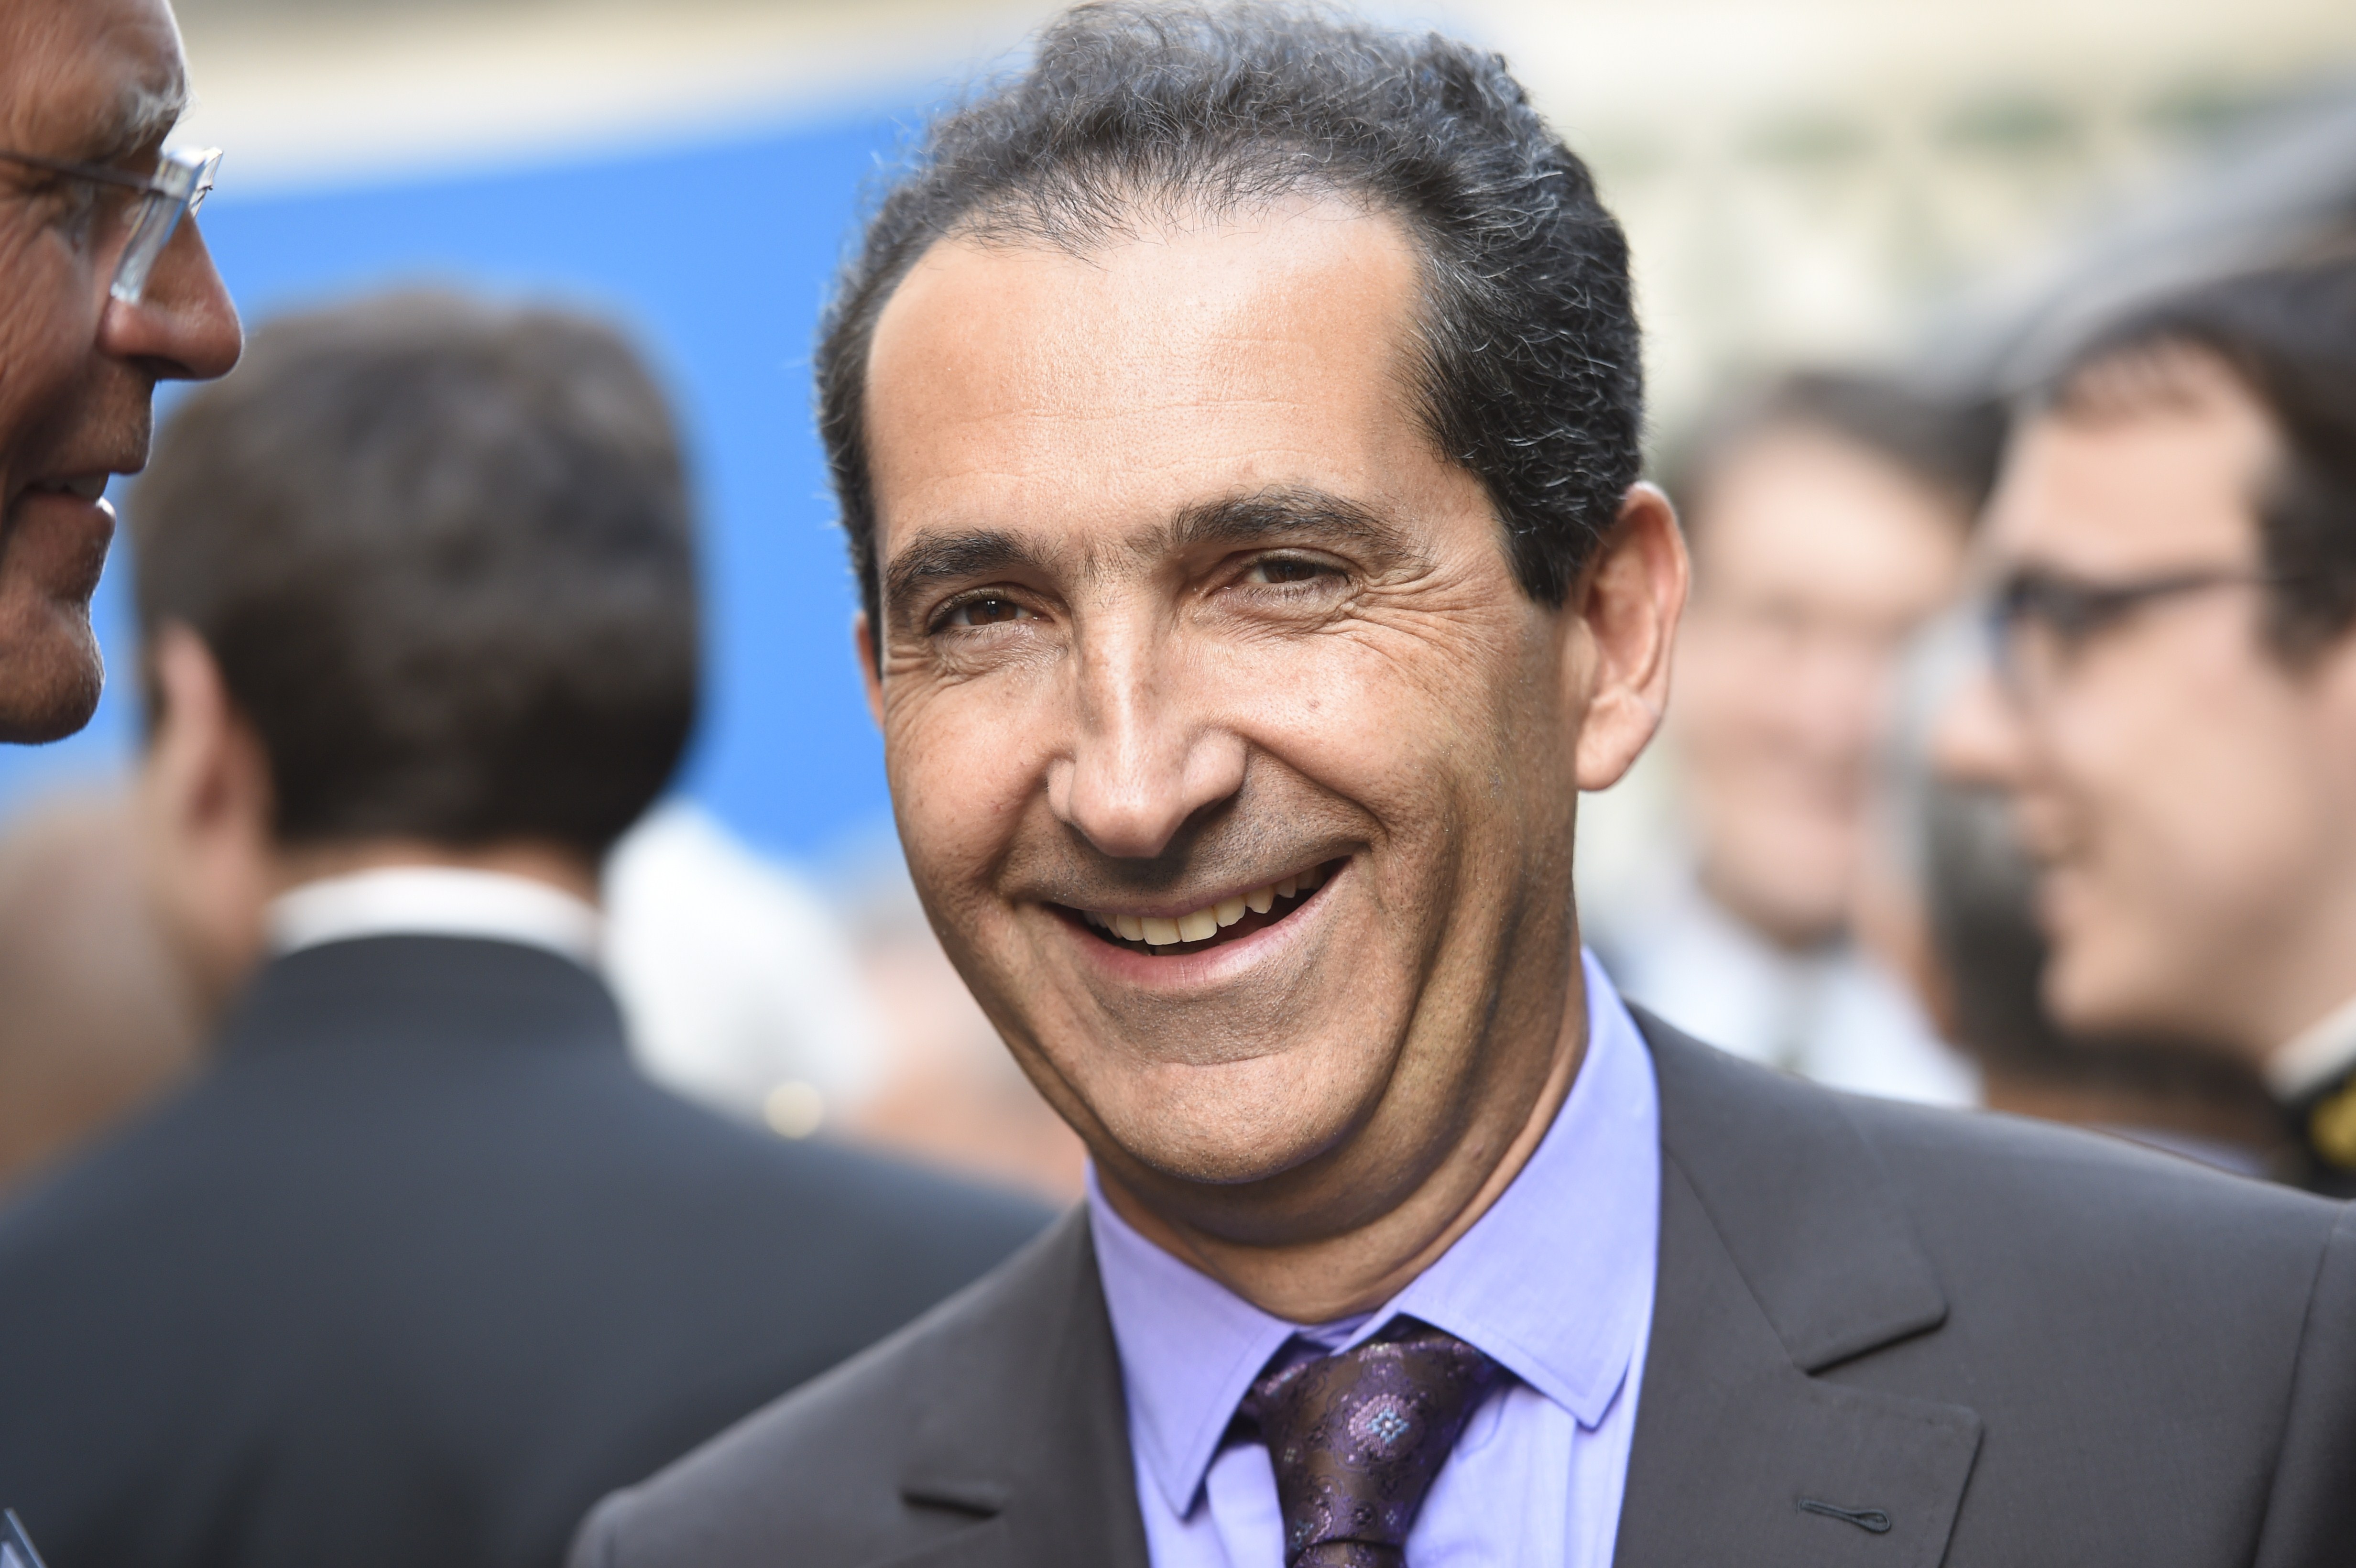 Altice is buying Cablevision